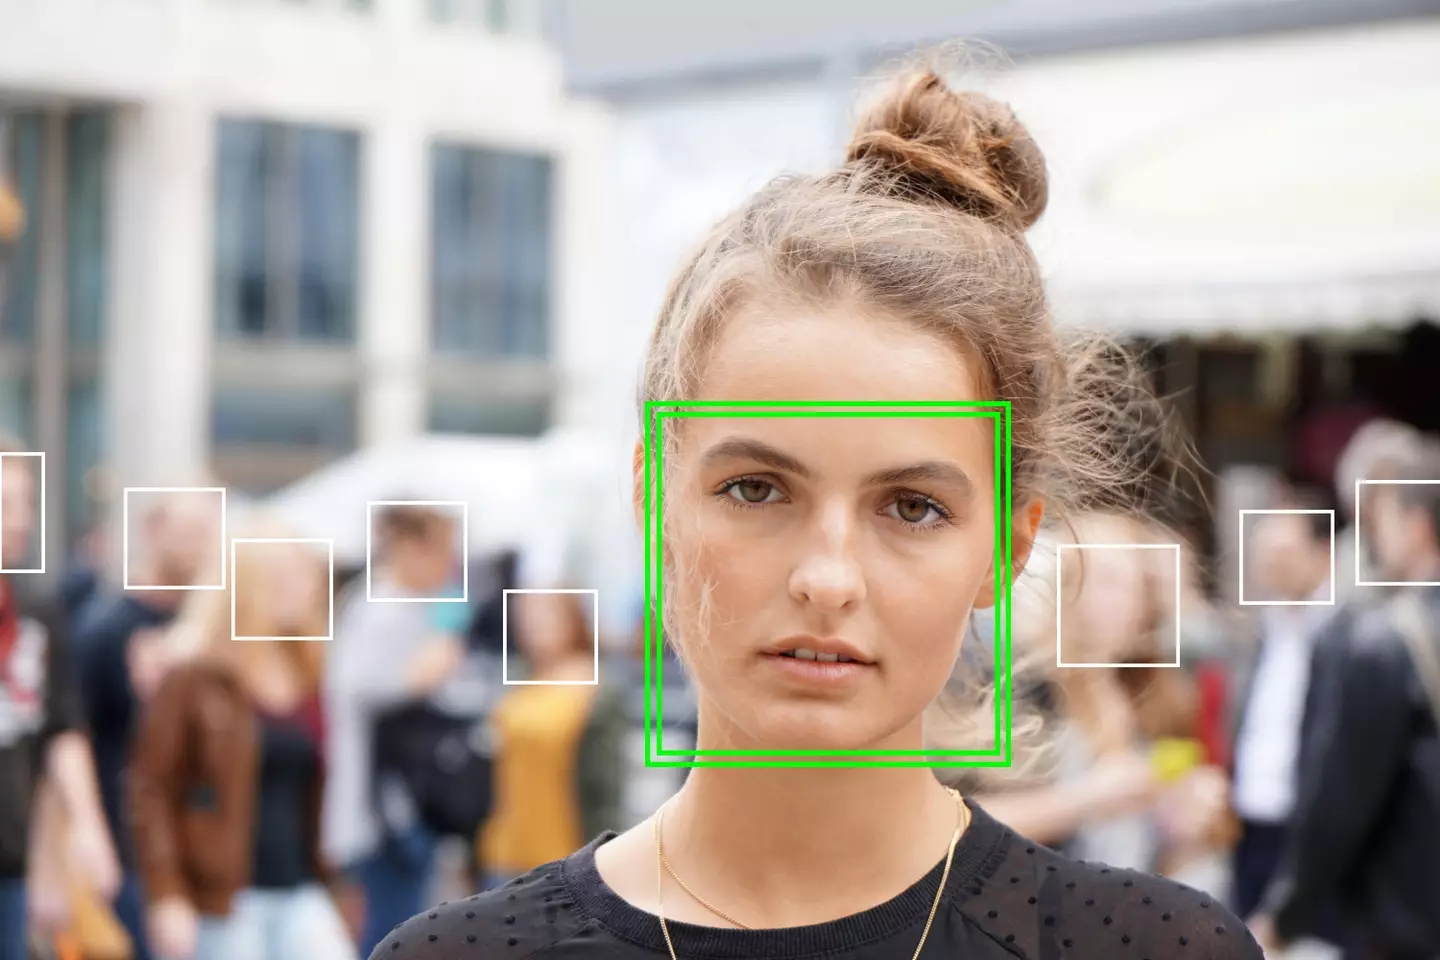 Ukraine has been given free access to AI facial recognition technology.